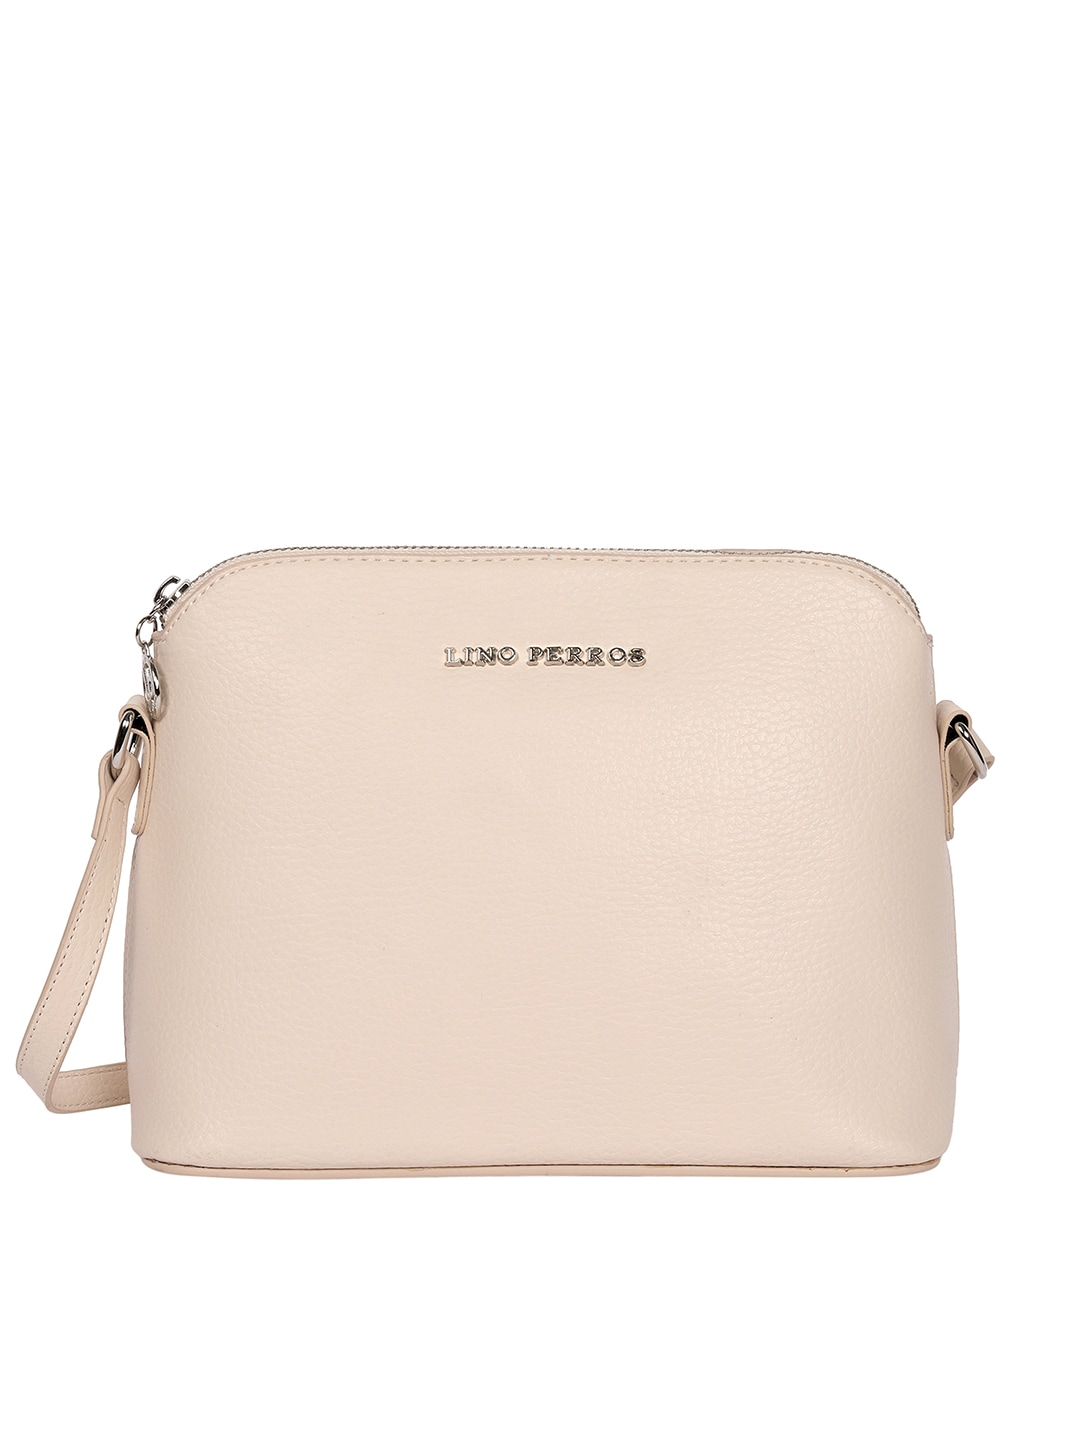 Lino Perros Off-White Solid Sling Bag Price in India